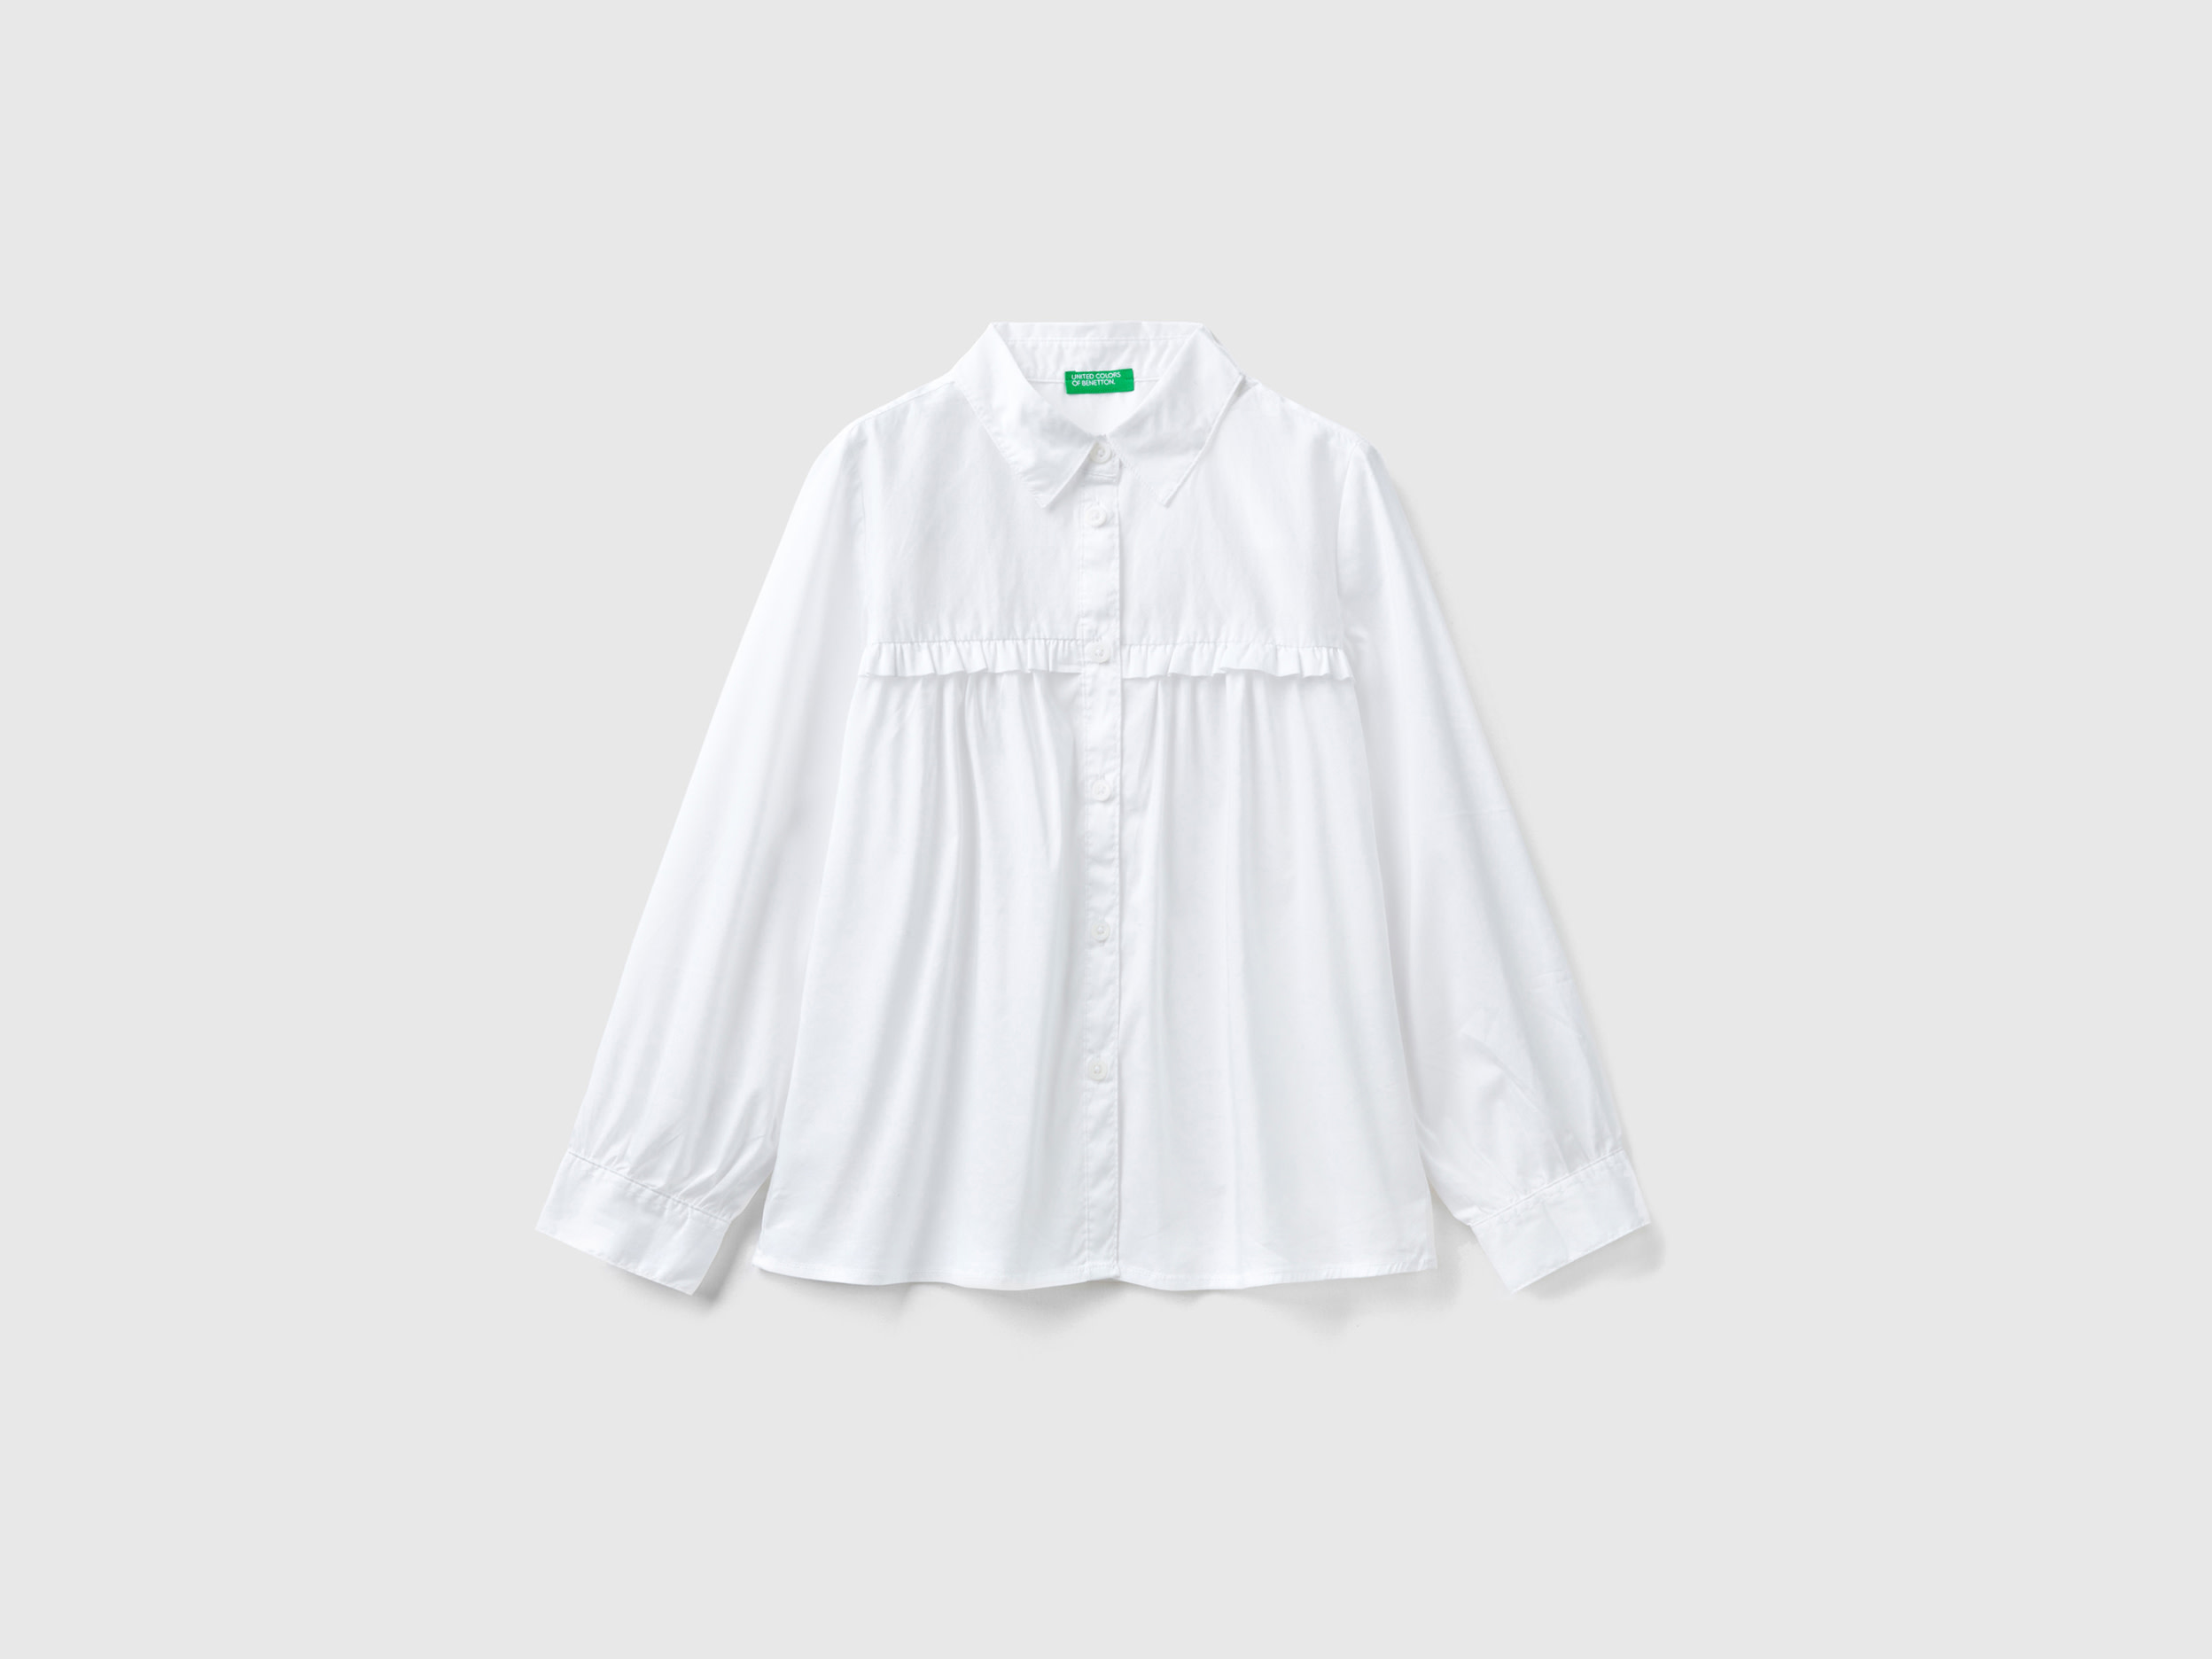 Benetton, Shirt With Rouches On The Yoke, size S, White, Kids